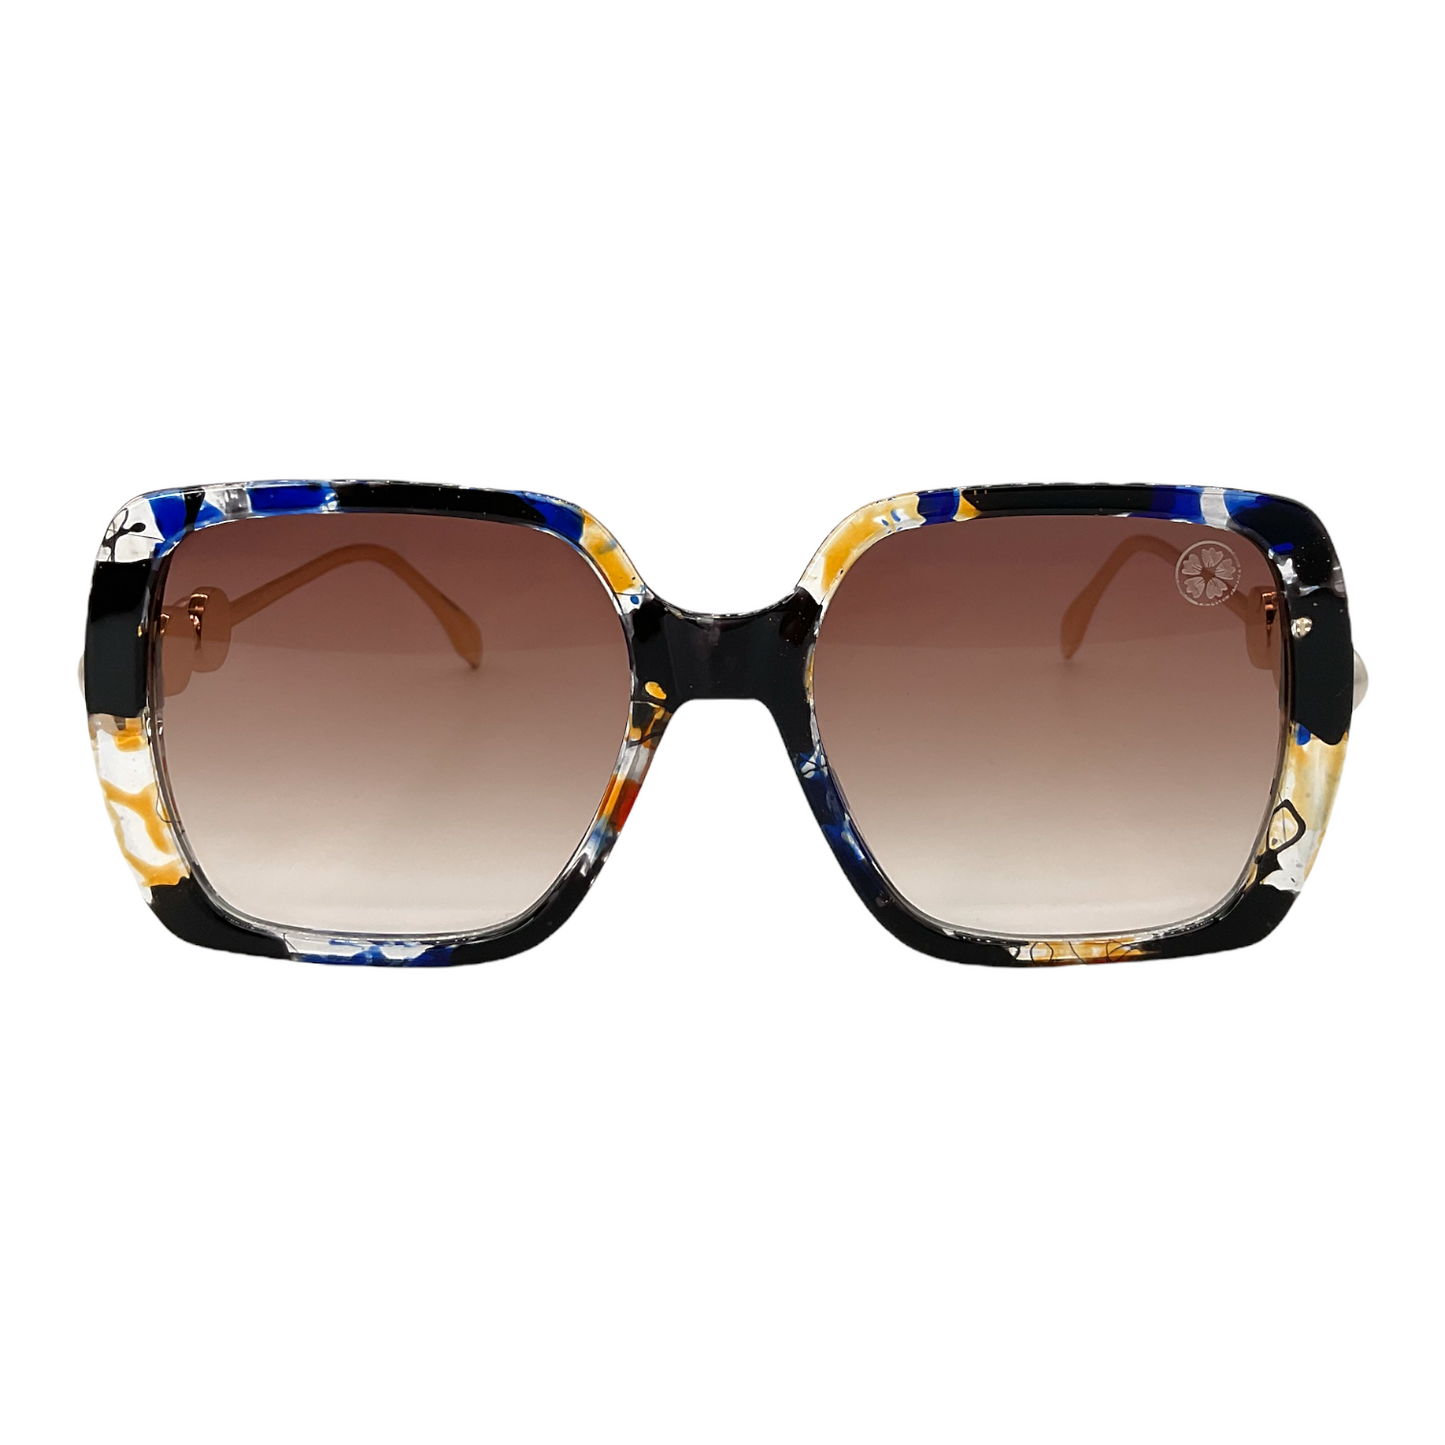 Louis Vuitton Tortoise Shell Sunglasses w/ side gold LV accents